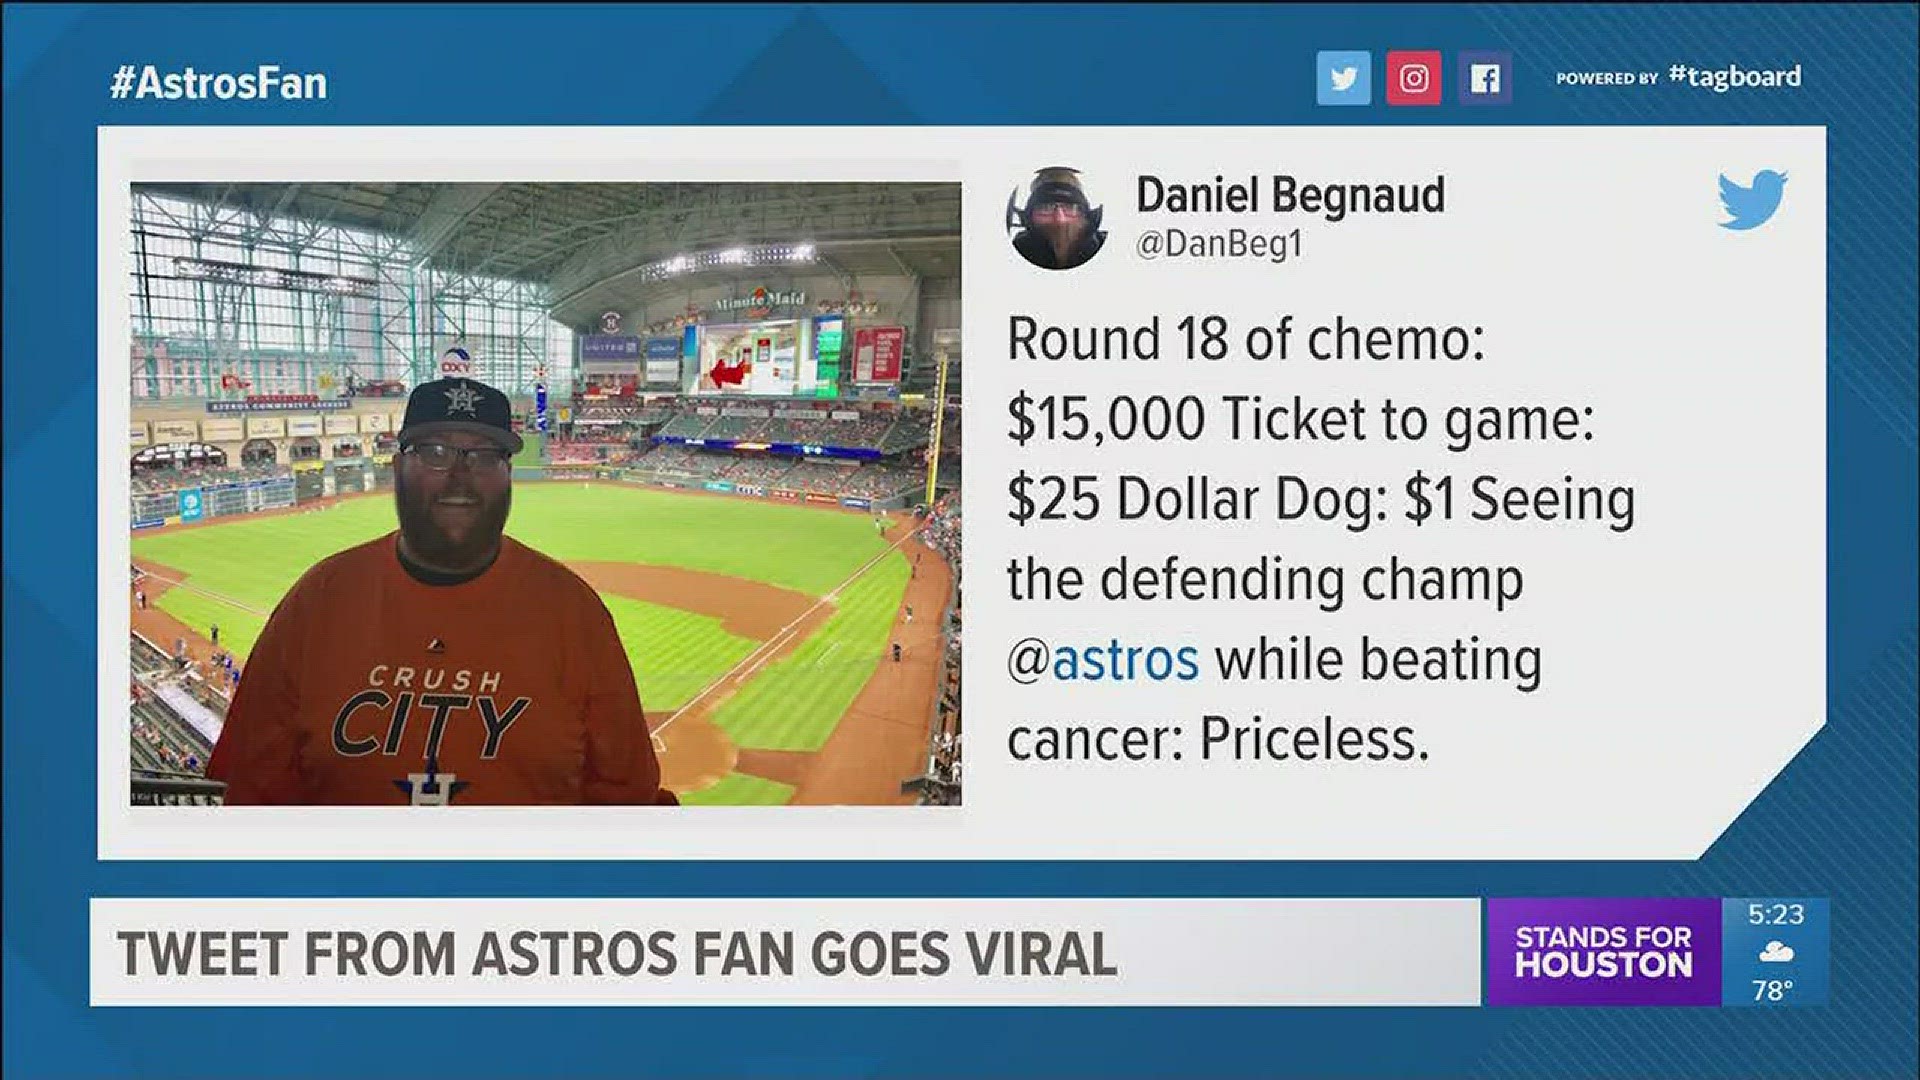 A tweet from Astros fan Daniel Begnaud has gone viral, and it's one that will tug at your heartstrings.